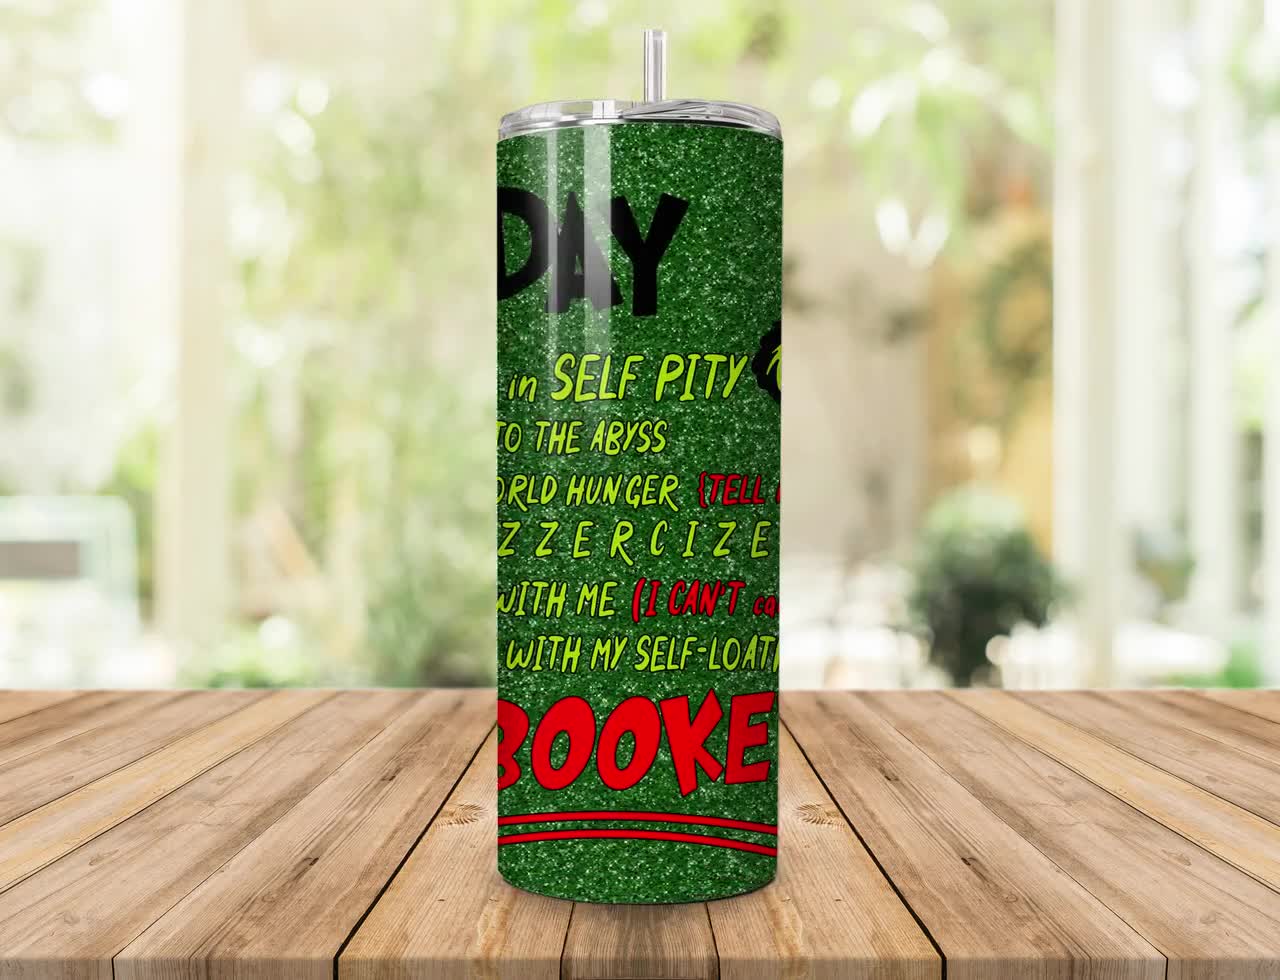 Grinch Tumbler, Christmas Grinch My Day is Booked Custom 20oz Skinny  Tumbler, the Grinch, Grinch Cup 